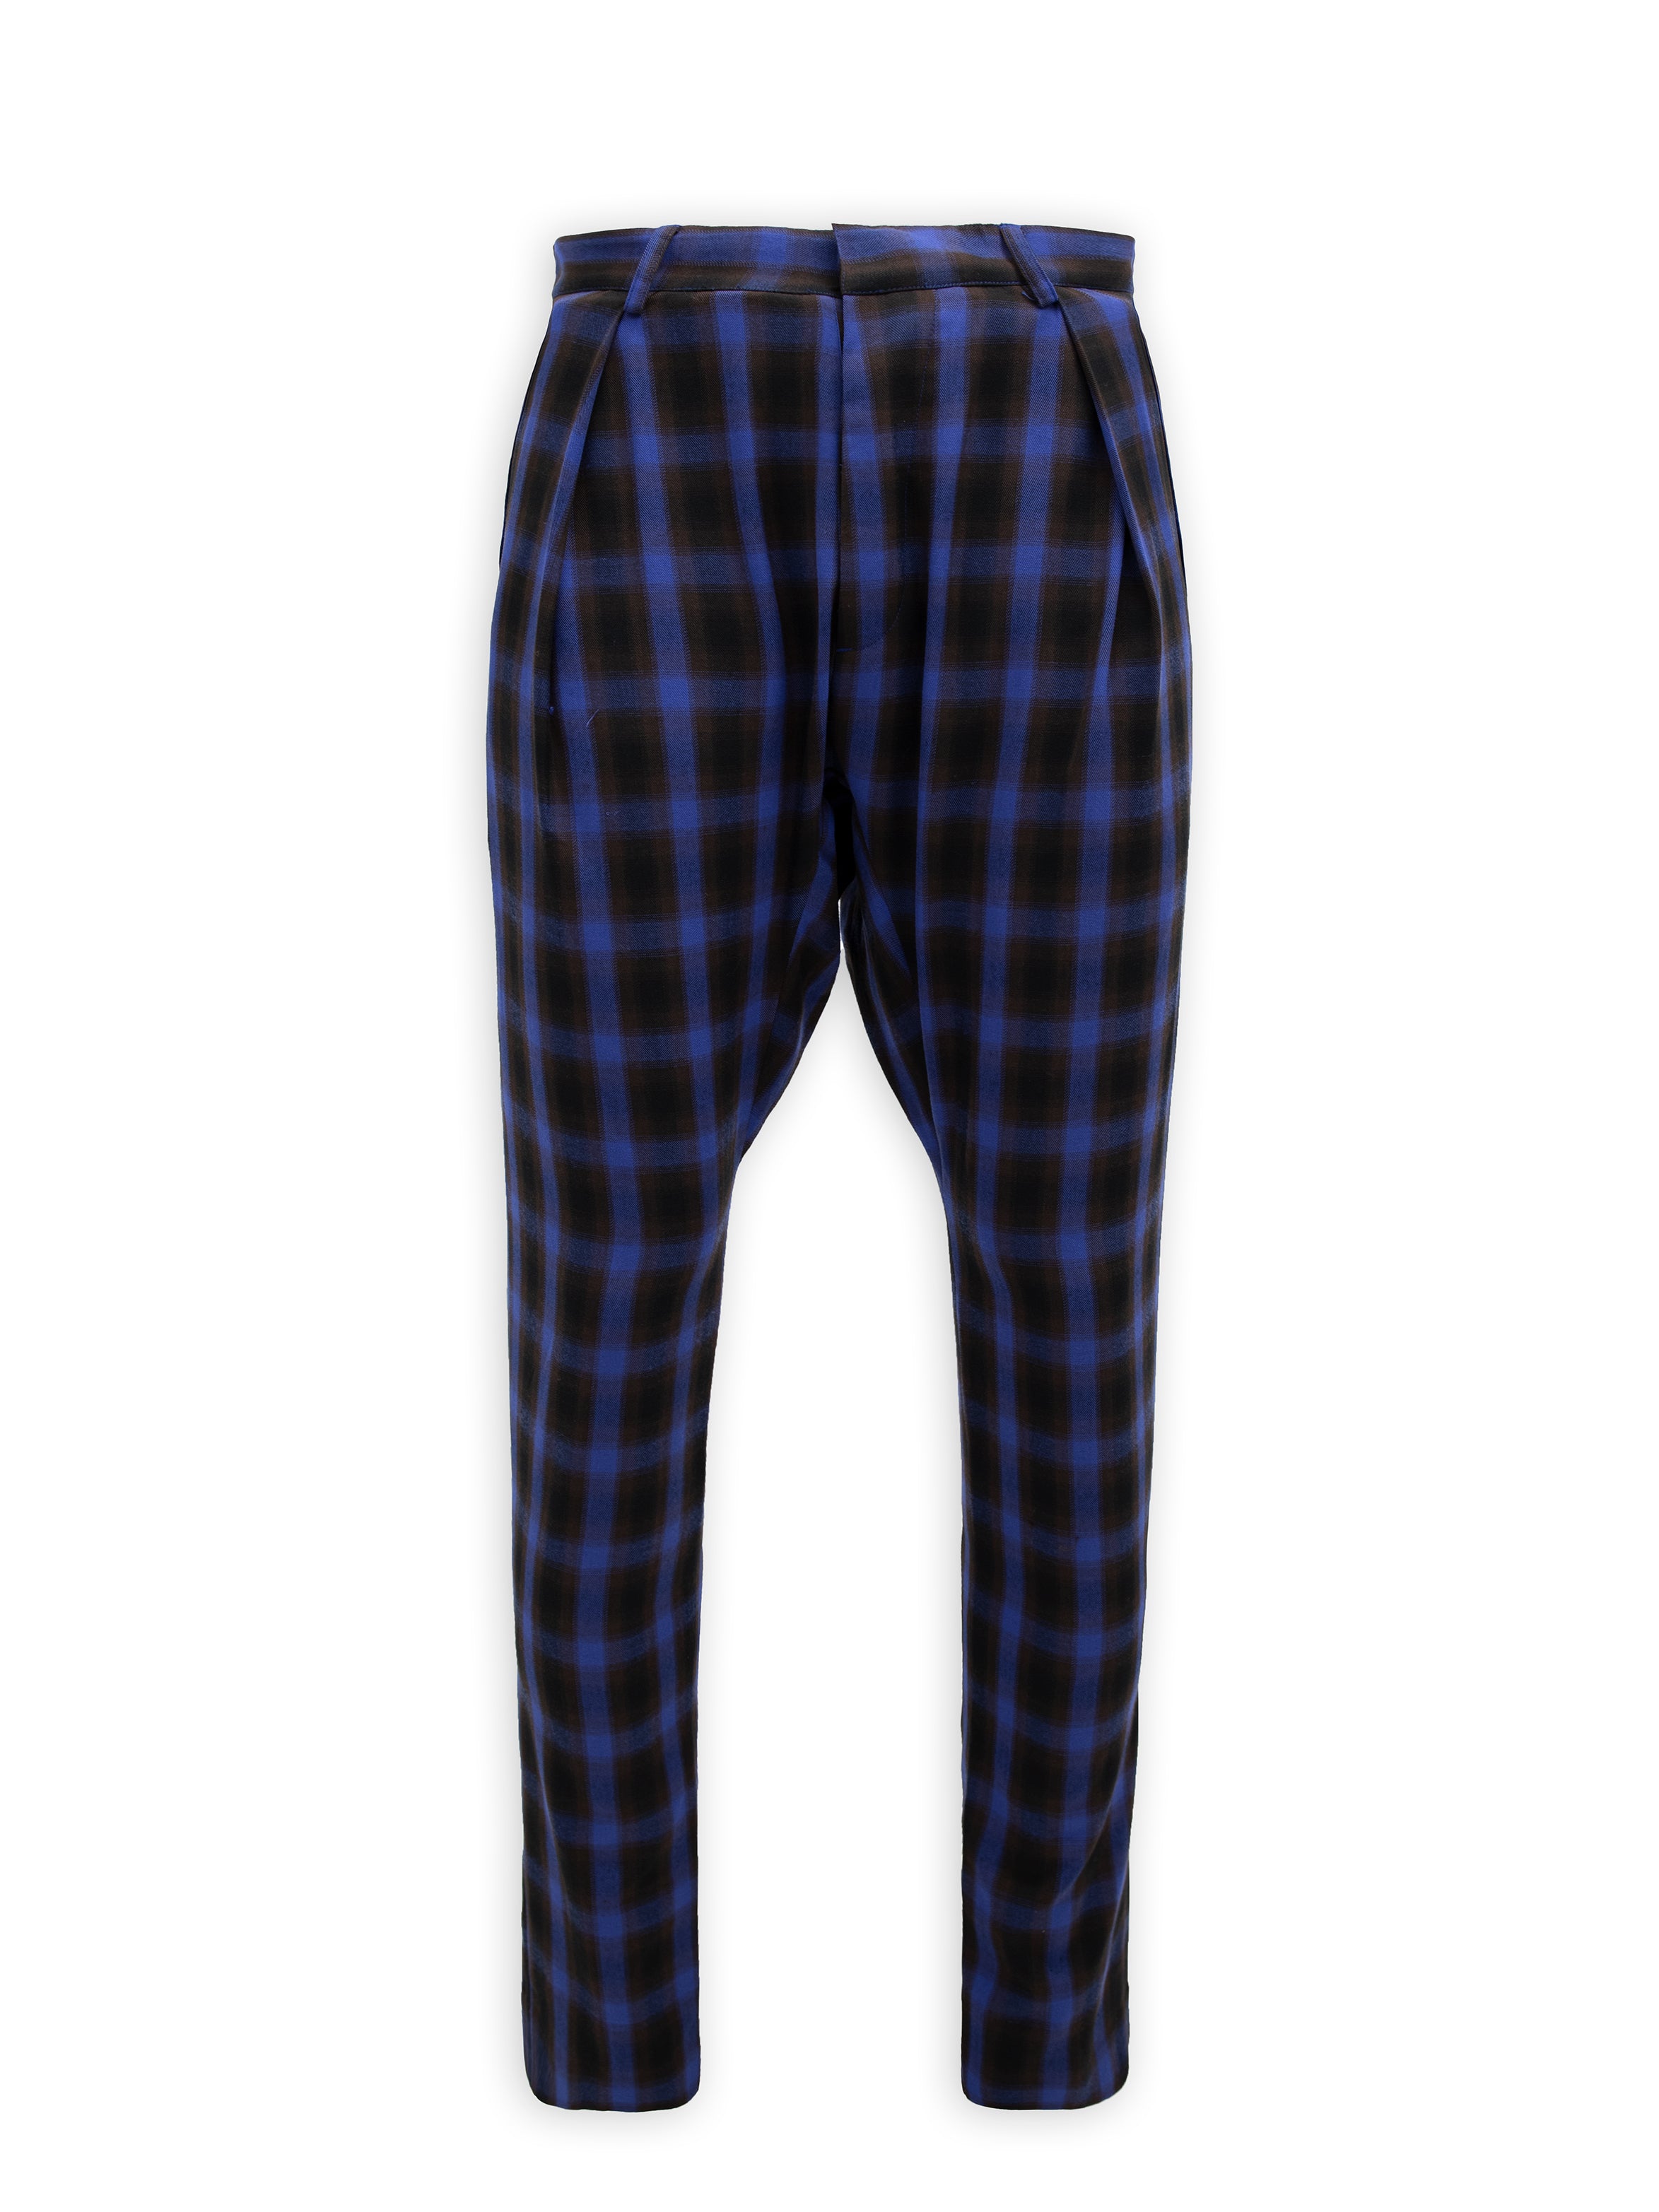 PURPLE CHECKED TROUSERS